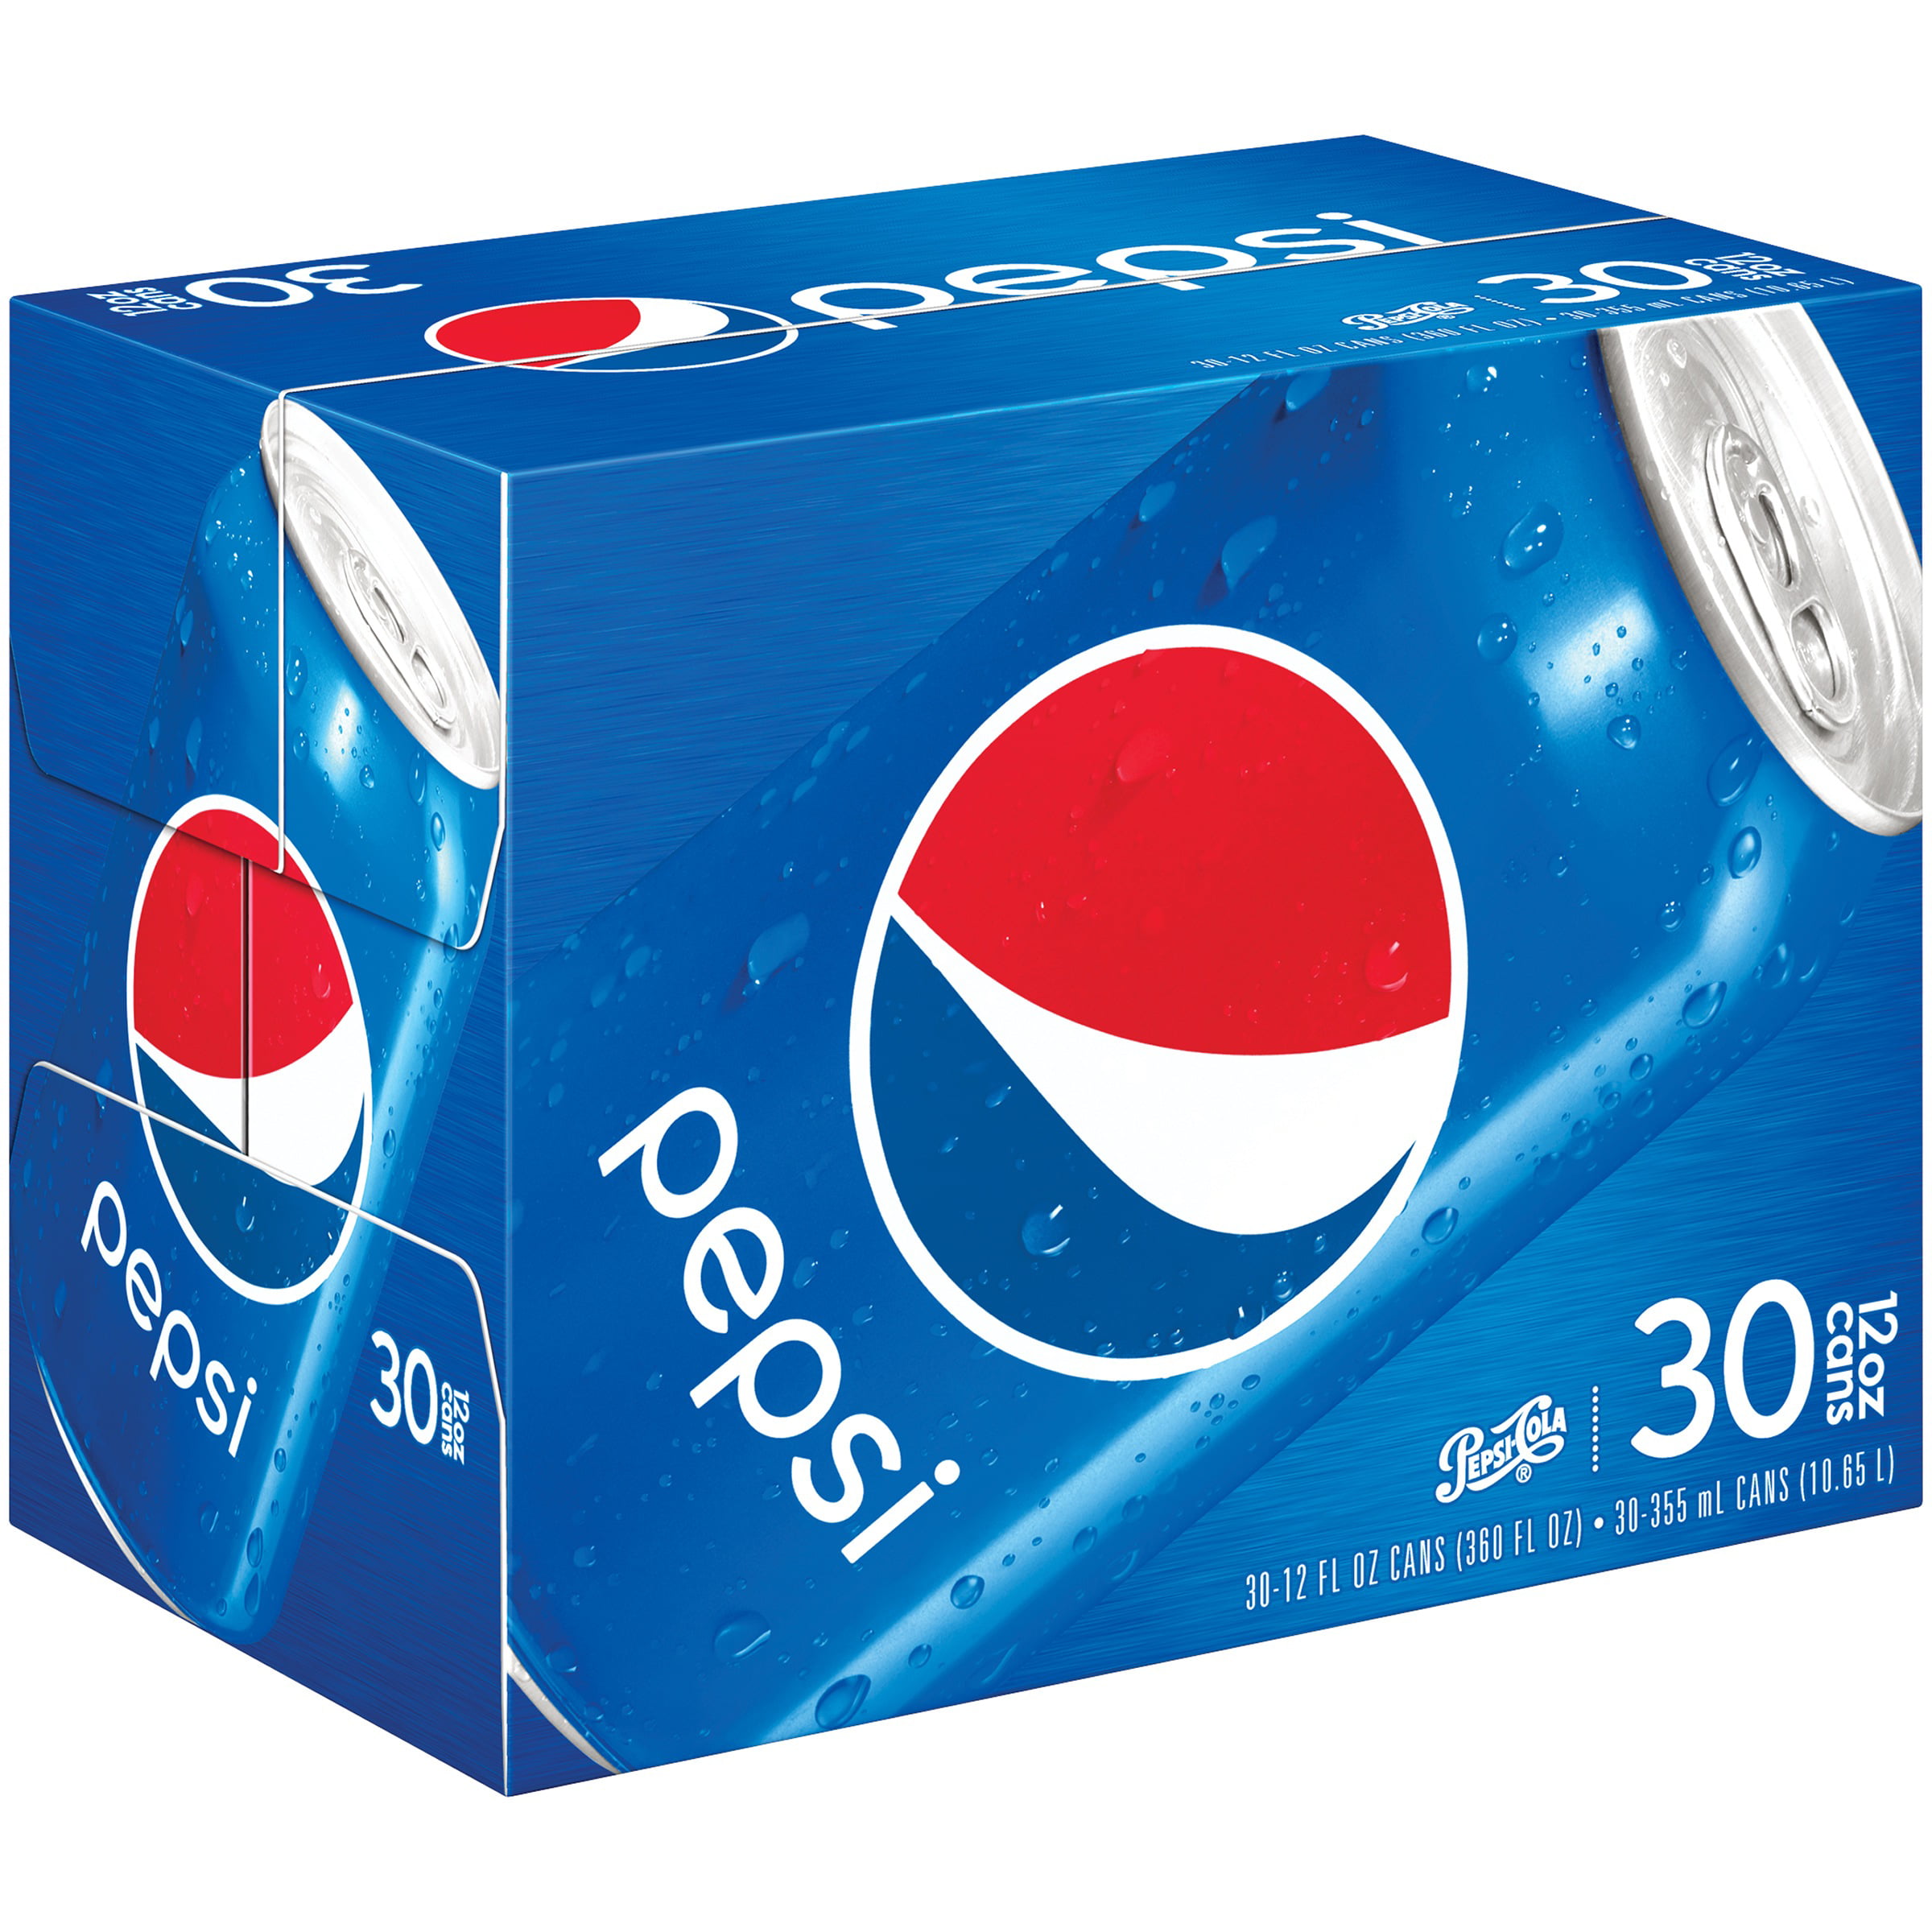 How much is a 24 pack of pepsi at walmart Diet Pepsi Soda 12 Oz Cans 24 Count Walmart Com Walmart Com